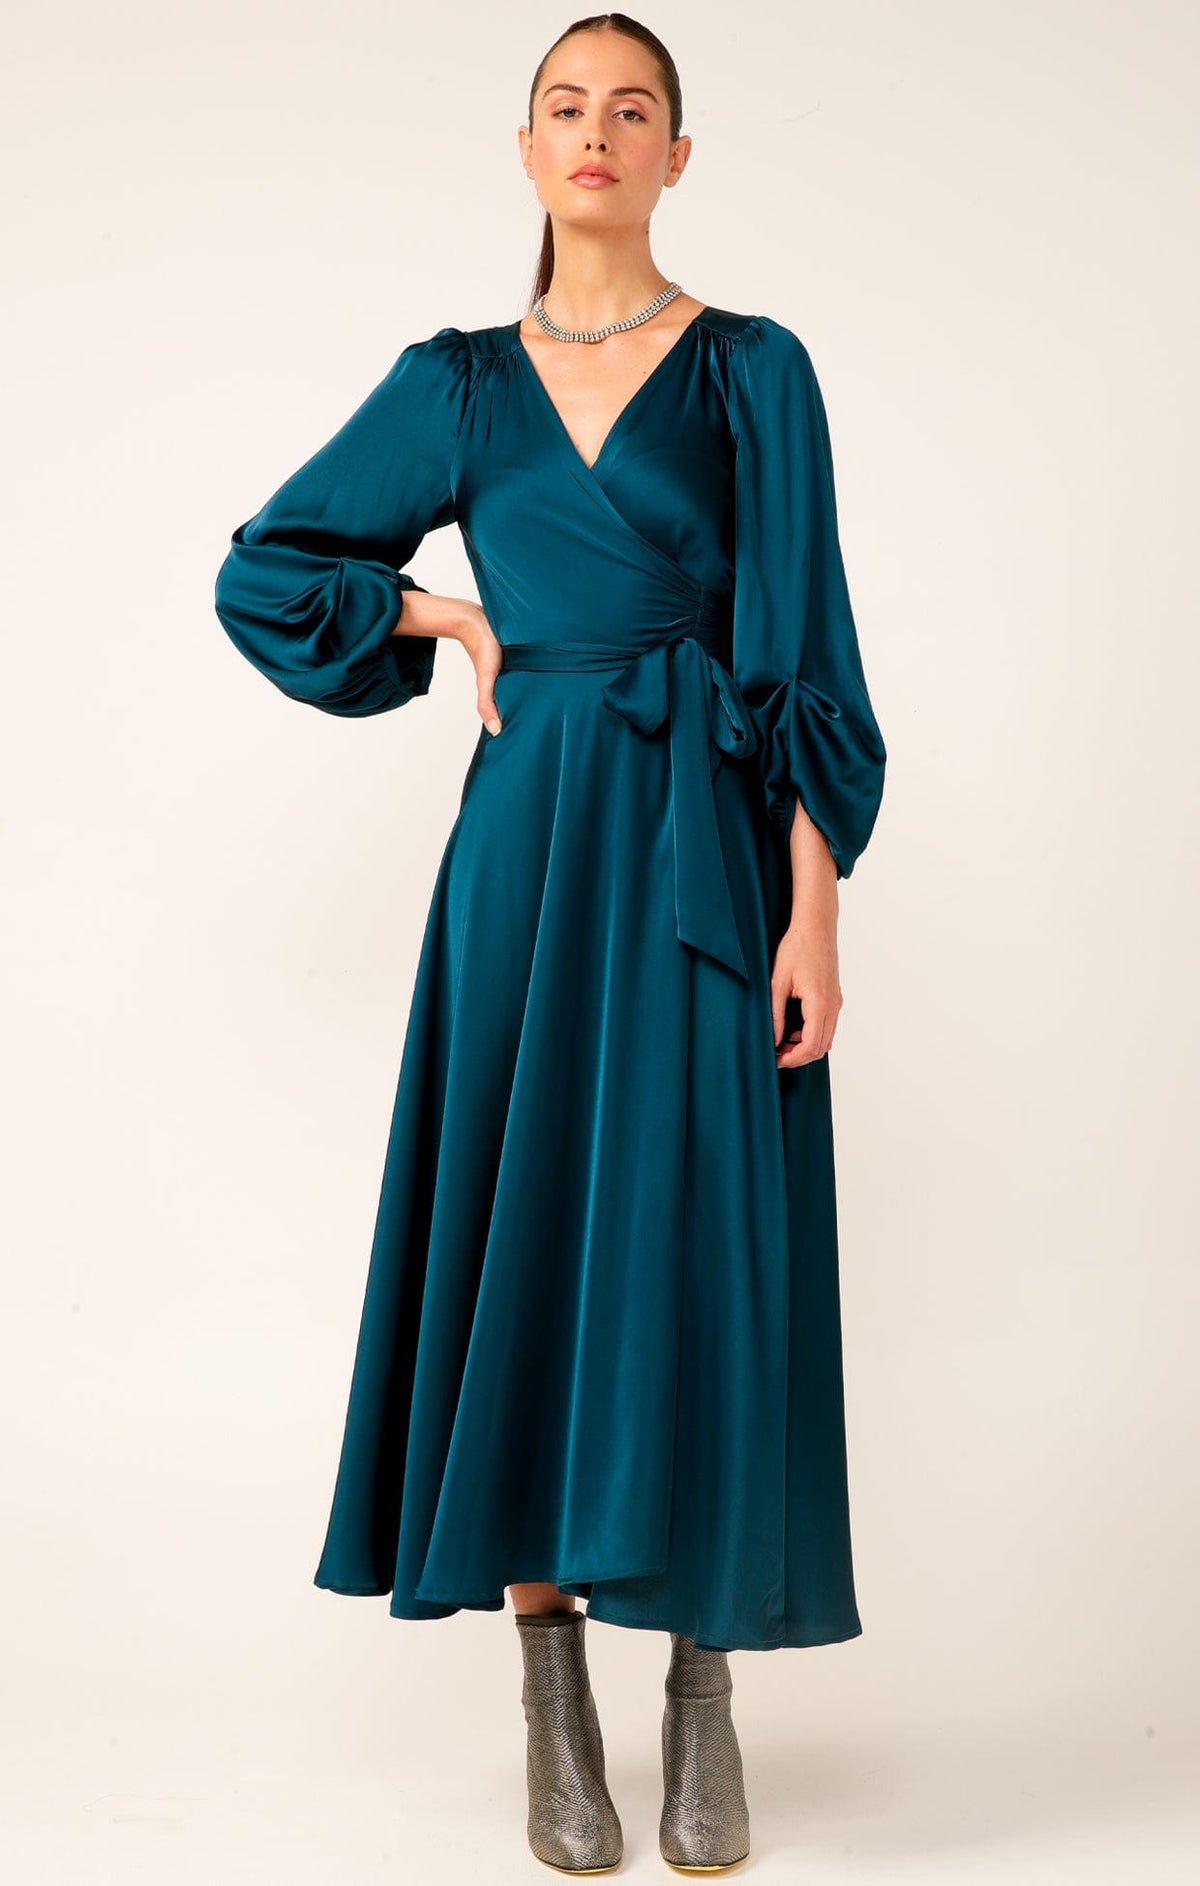 Dresses Events DIMMI WRAP DRESS IN PEACOCK